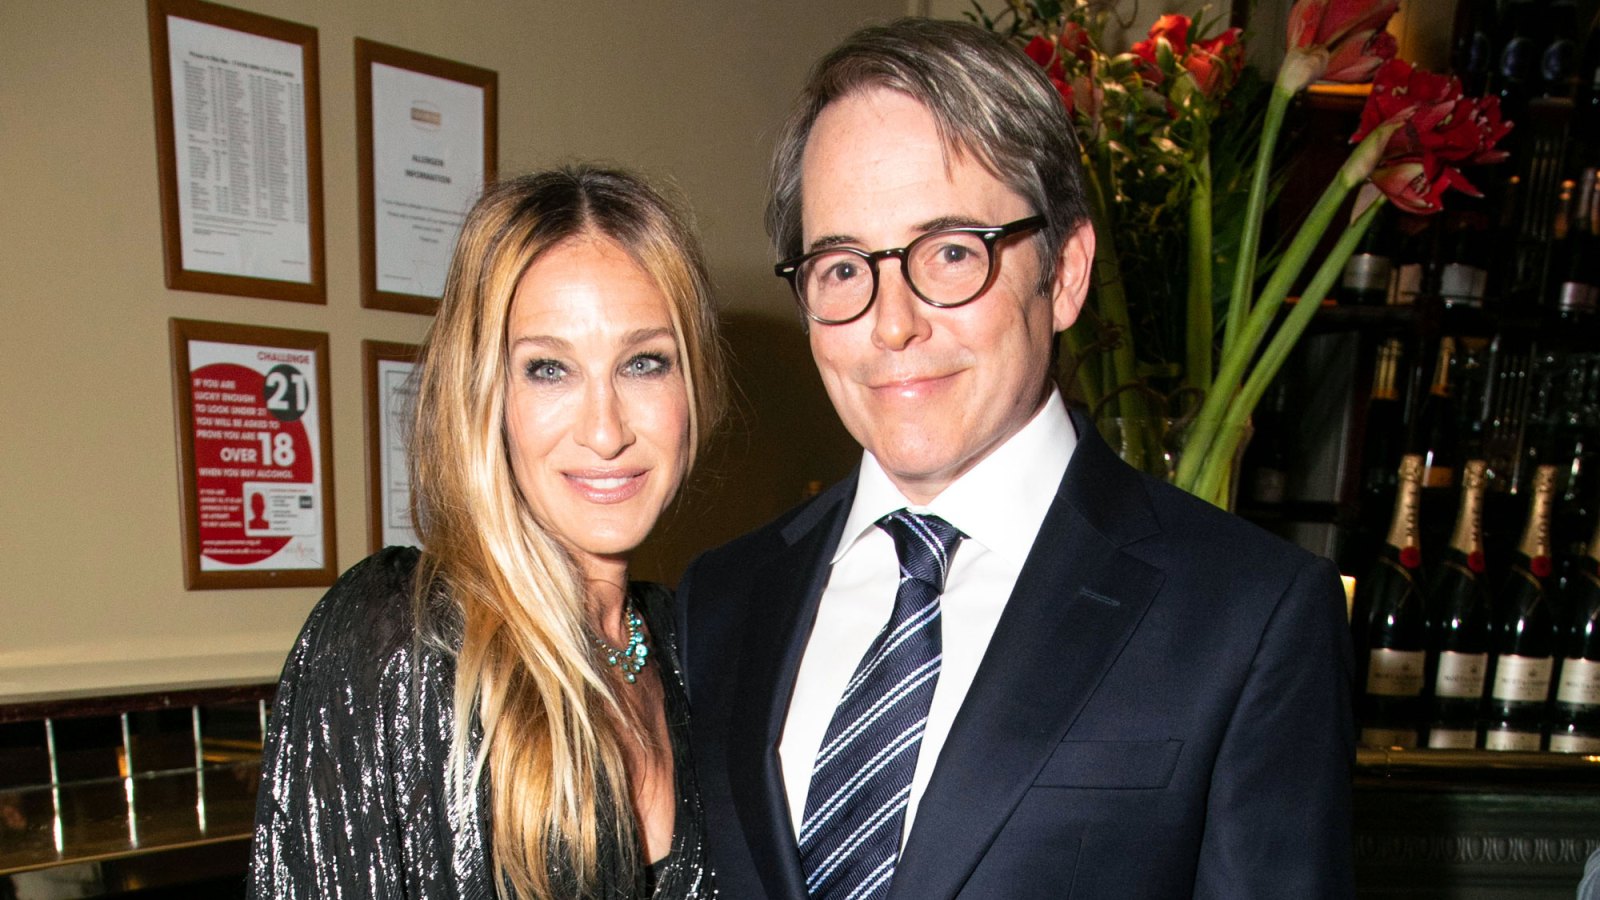 Sarah Jessica Parker Was ‘Nervous’ When Matthew Broderick Visited ‘Sex and The City’ Set